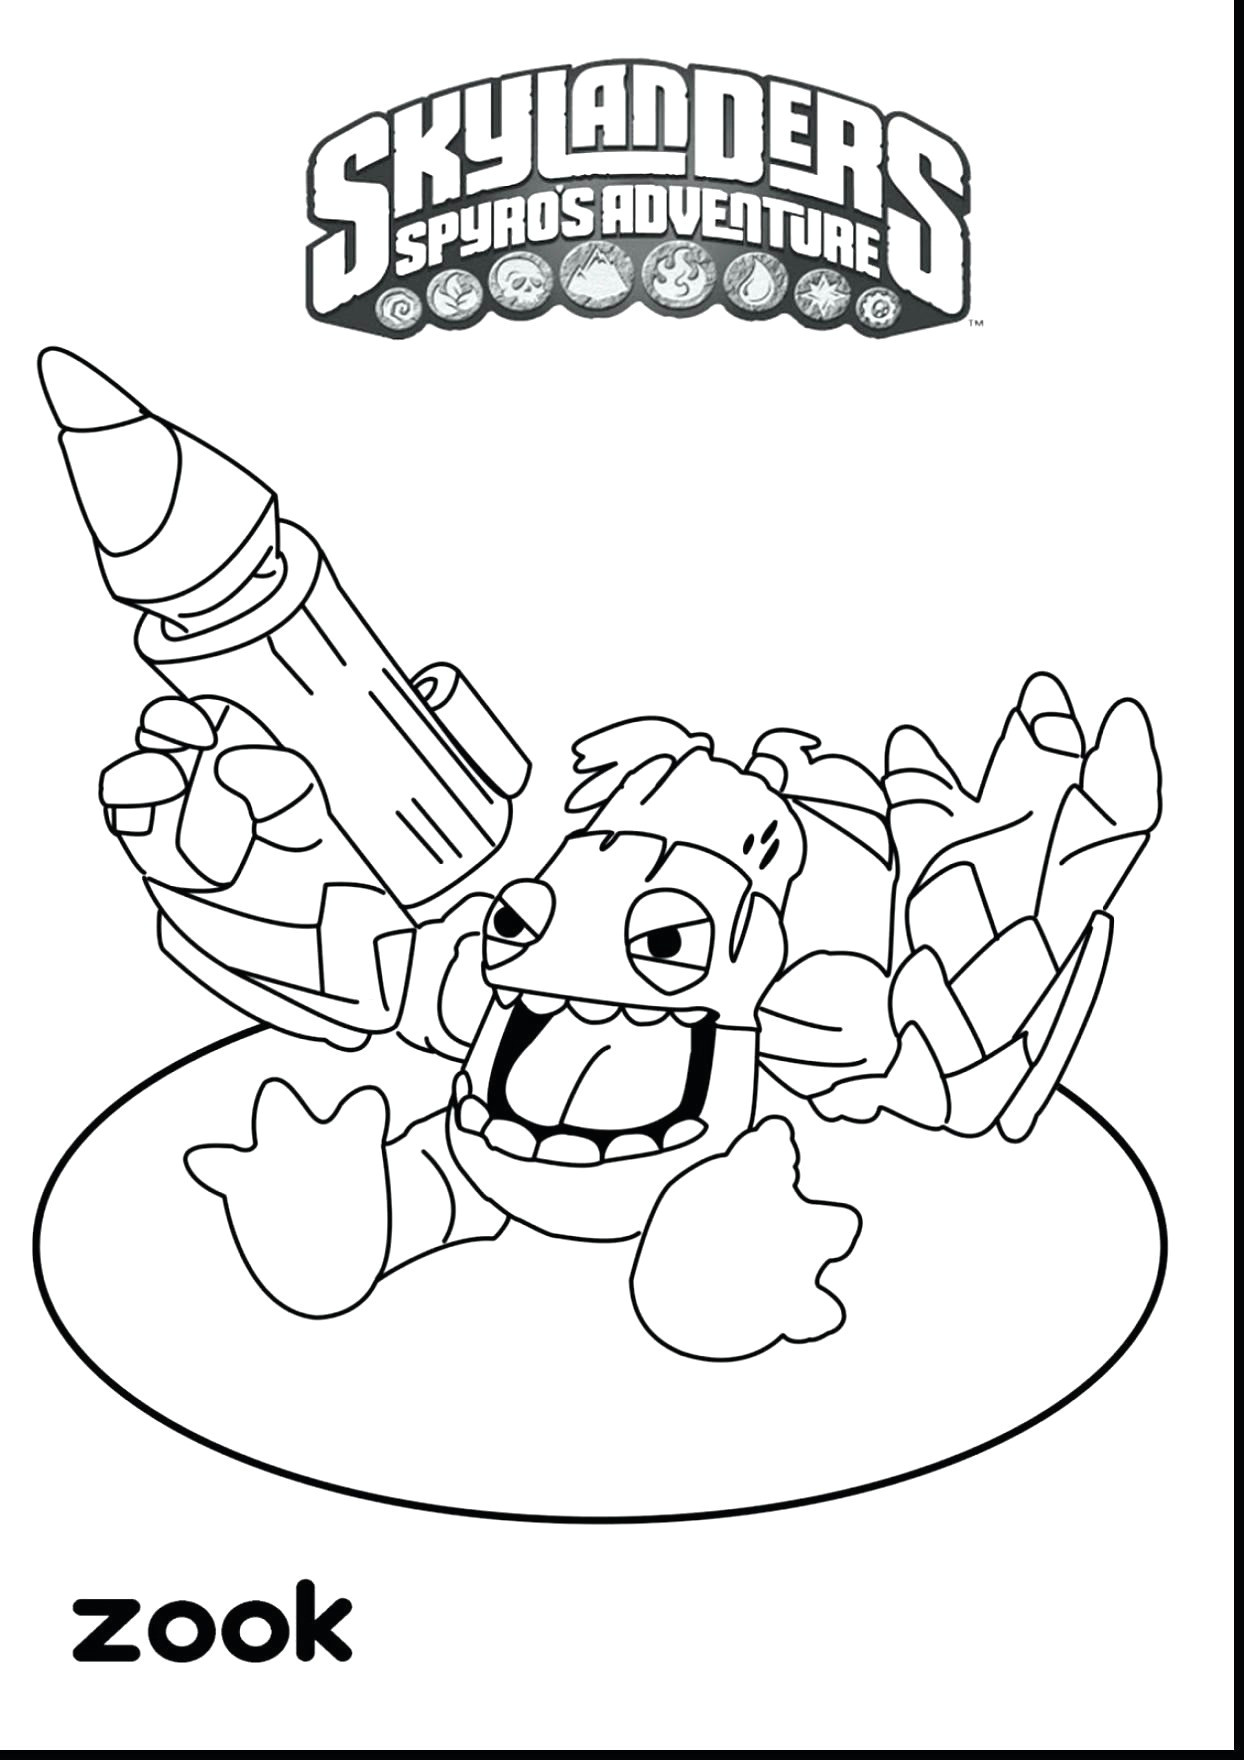 Easy Drawings for Boys Www Colouring Pages Brilliant Easy to Draw Instruments Home Coloring